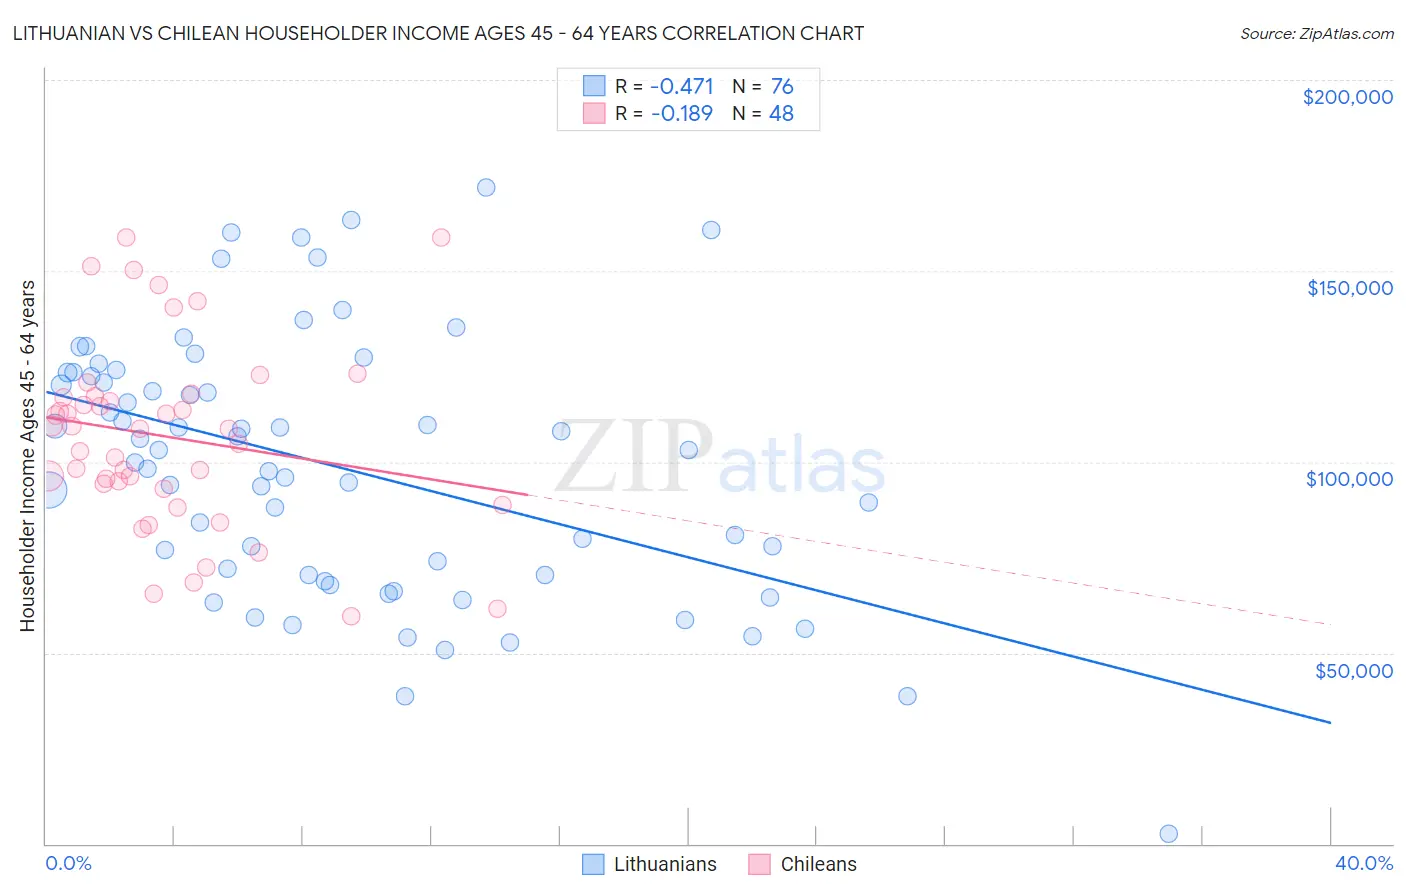 Lithuanian vs Chilean Householder Income Ages 45 - 64 years